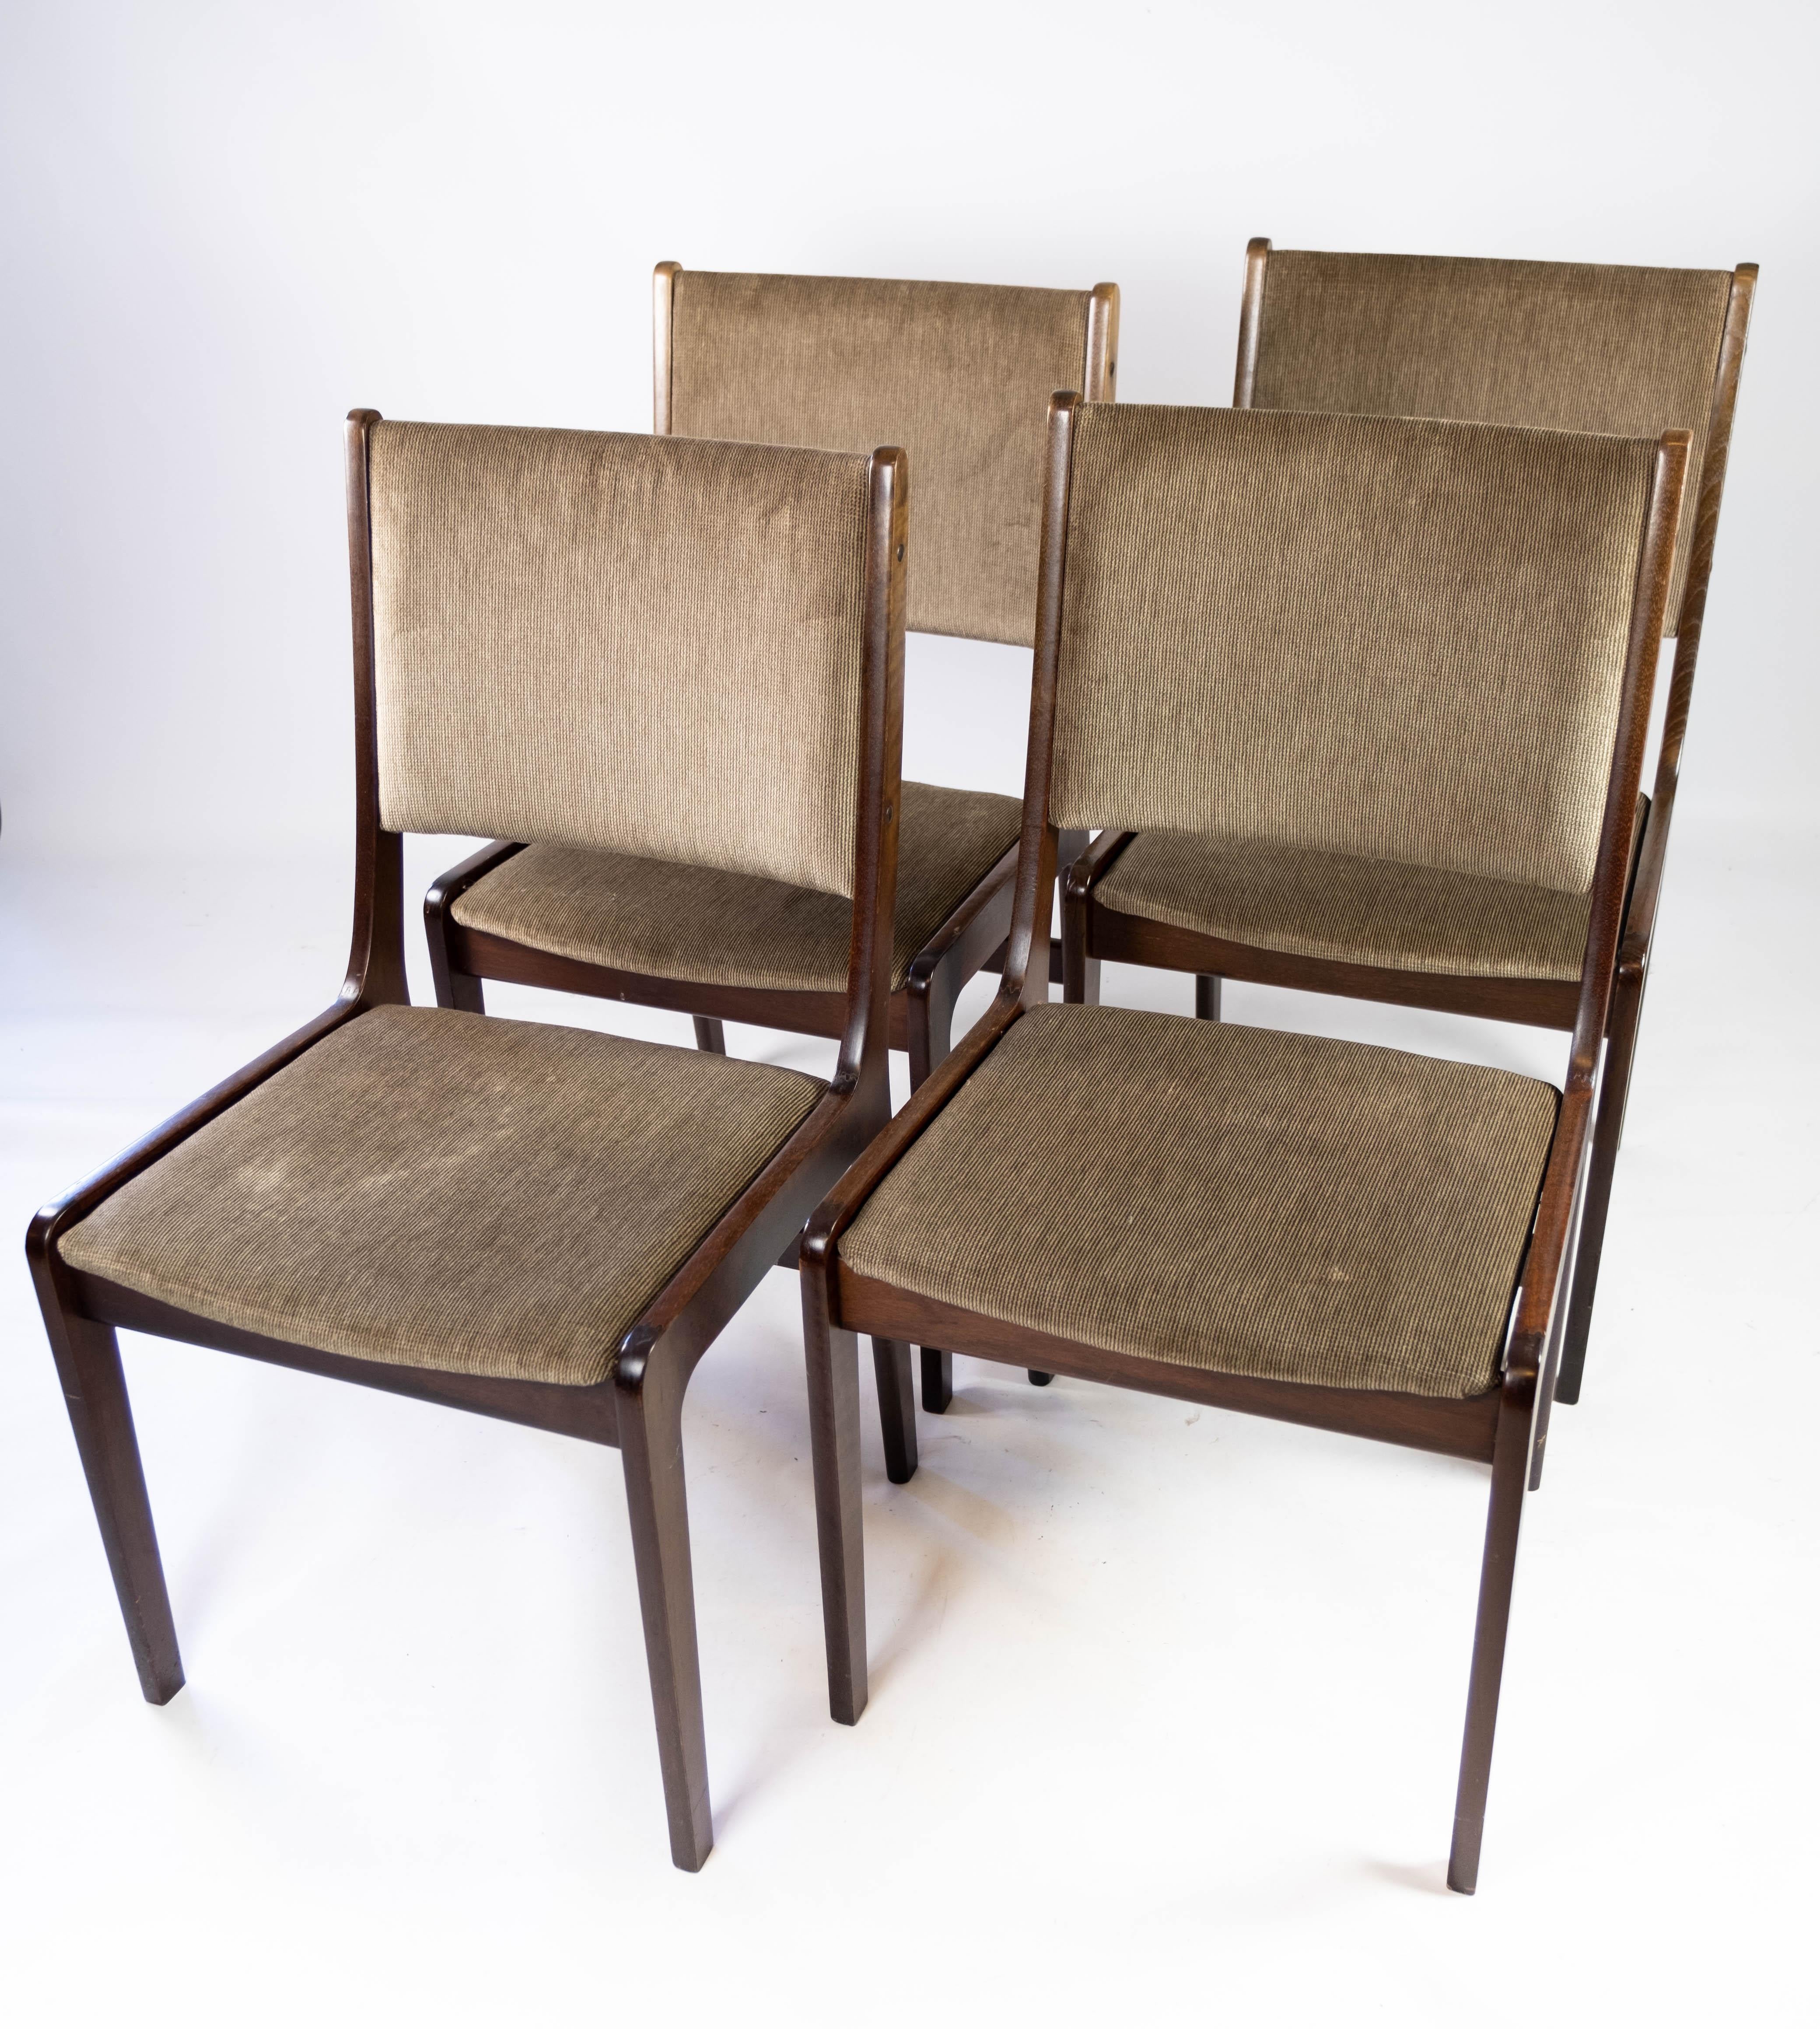 Set of four dining room chairs in dark wood and dark fabric of Danish design manufactured by Farstrup in the 1960s. The chairs are in great vintage condition.
 